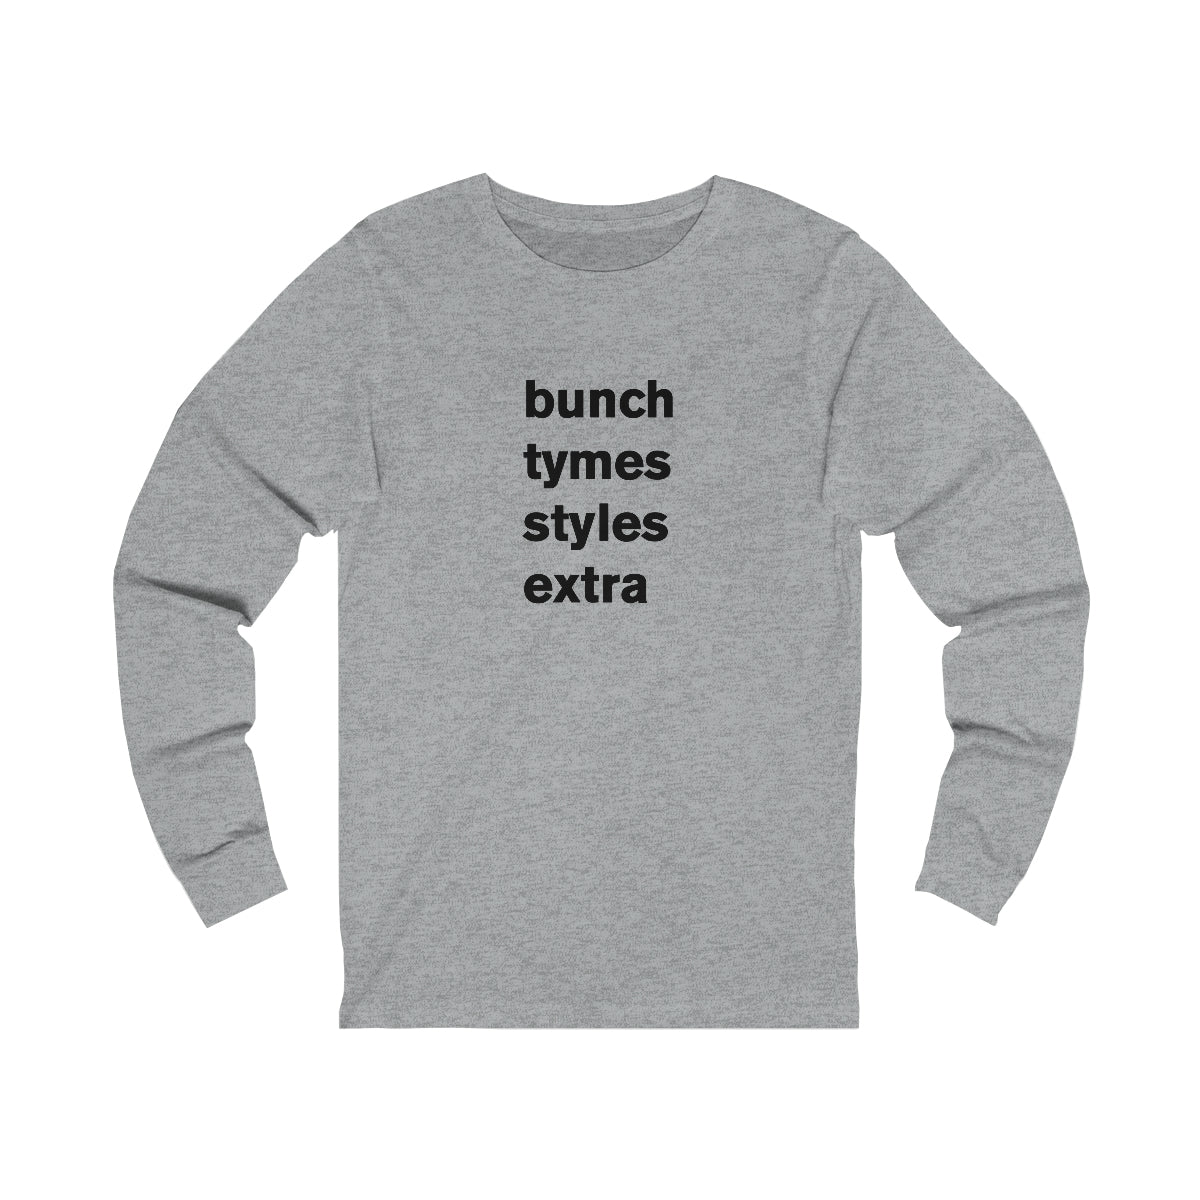 bunch tymes styles extra - long sleeve